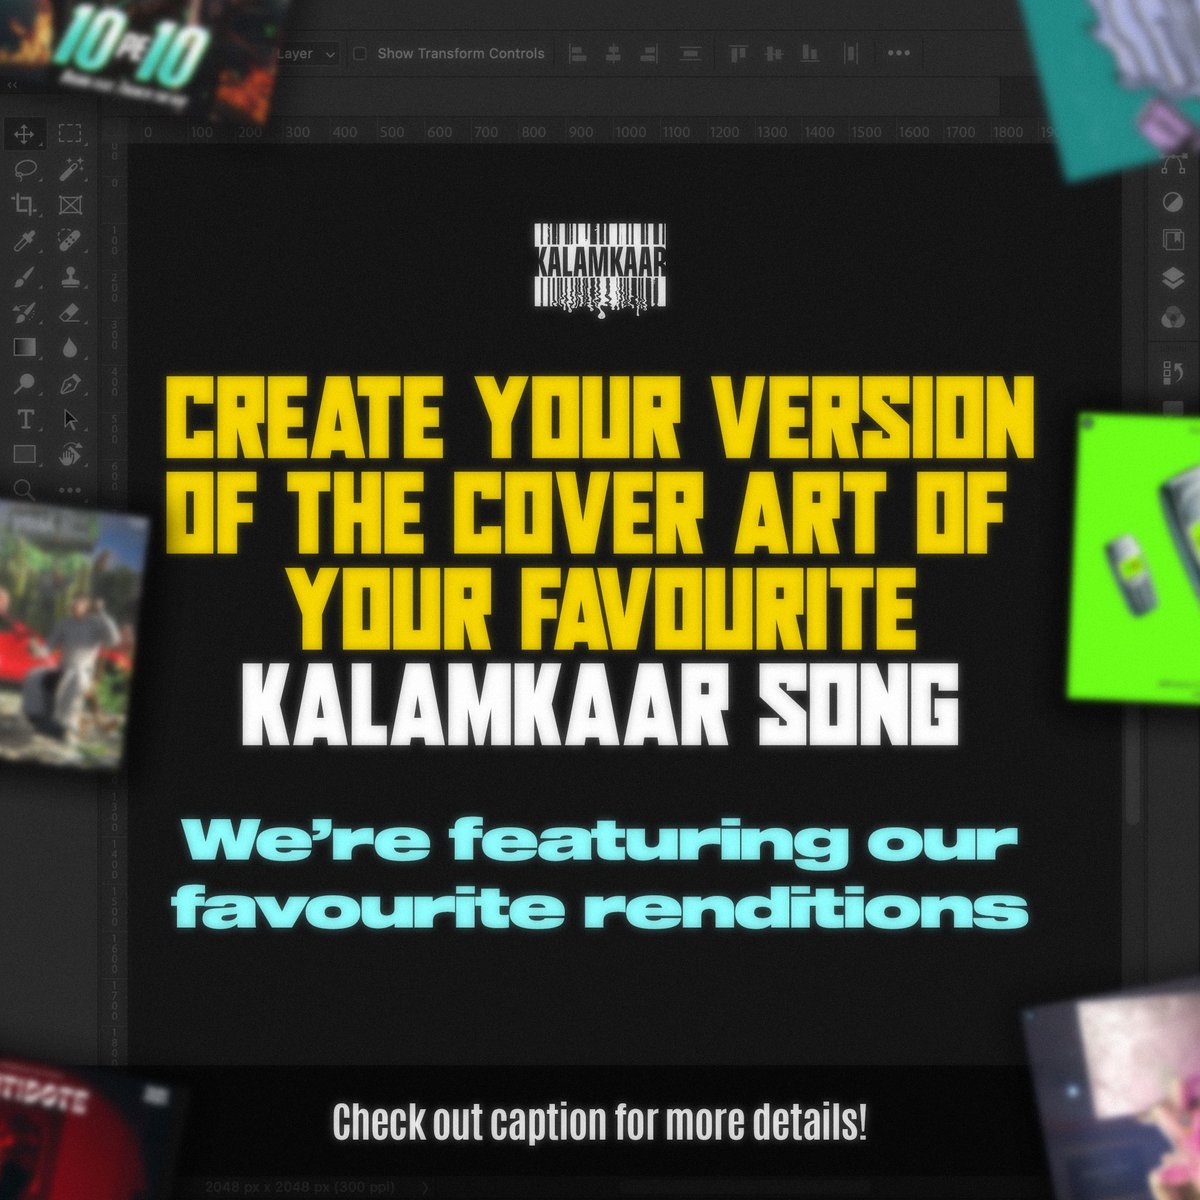 This is your opportunity to leave a lasting impression on Kalamkaar👊🏼 Follow these steps: 1️⃣ Create your artwork masterpiece. 2️⃣ Share it on Instagram as a post using the hashtags #WorldMusicDay & #KalamkaarMusic 3️⃣ Tag us @KalamkaarMusic in your post #WorldMusicDay #Kalamkaar